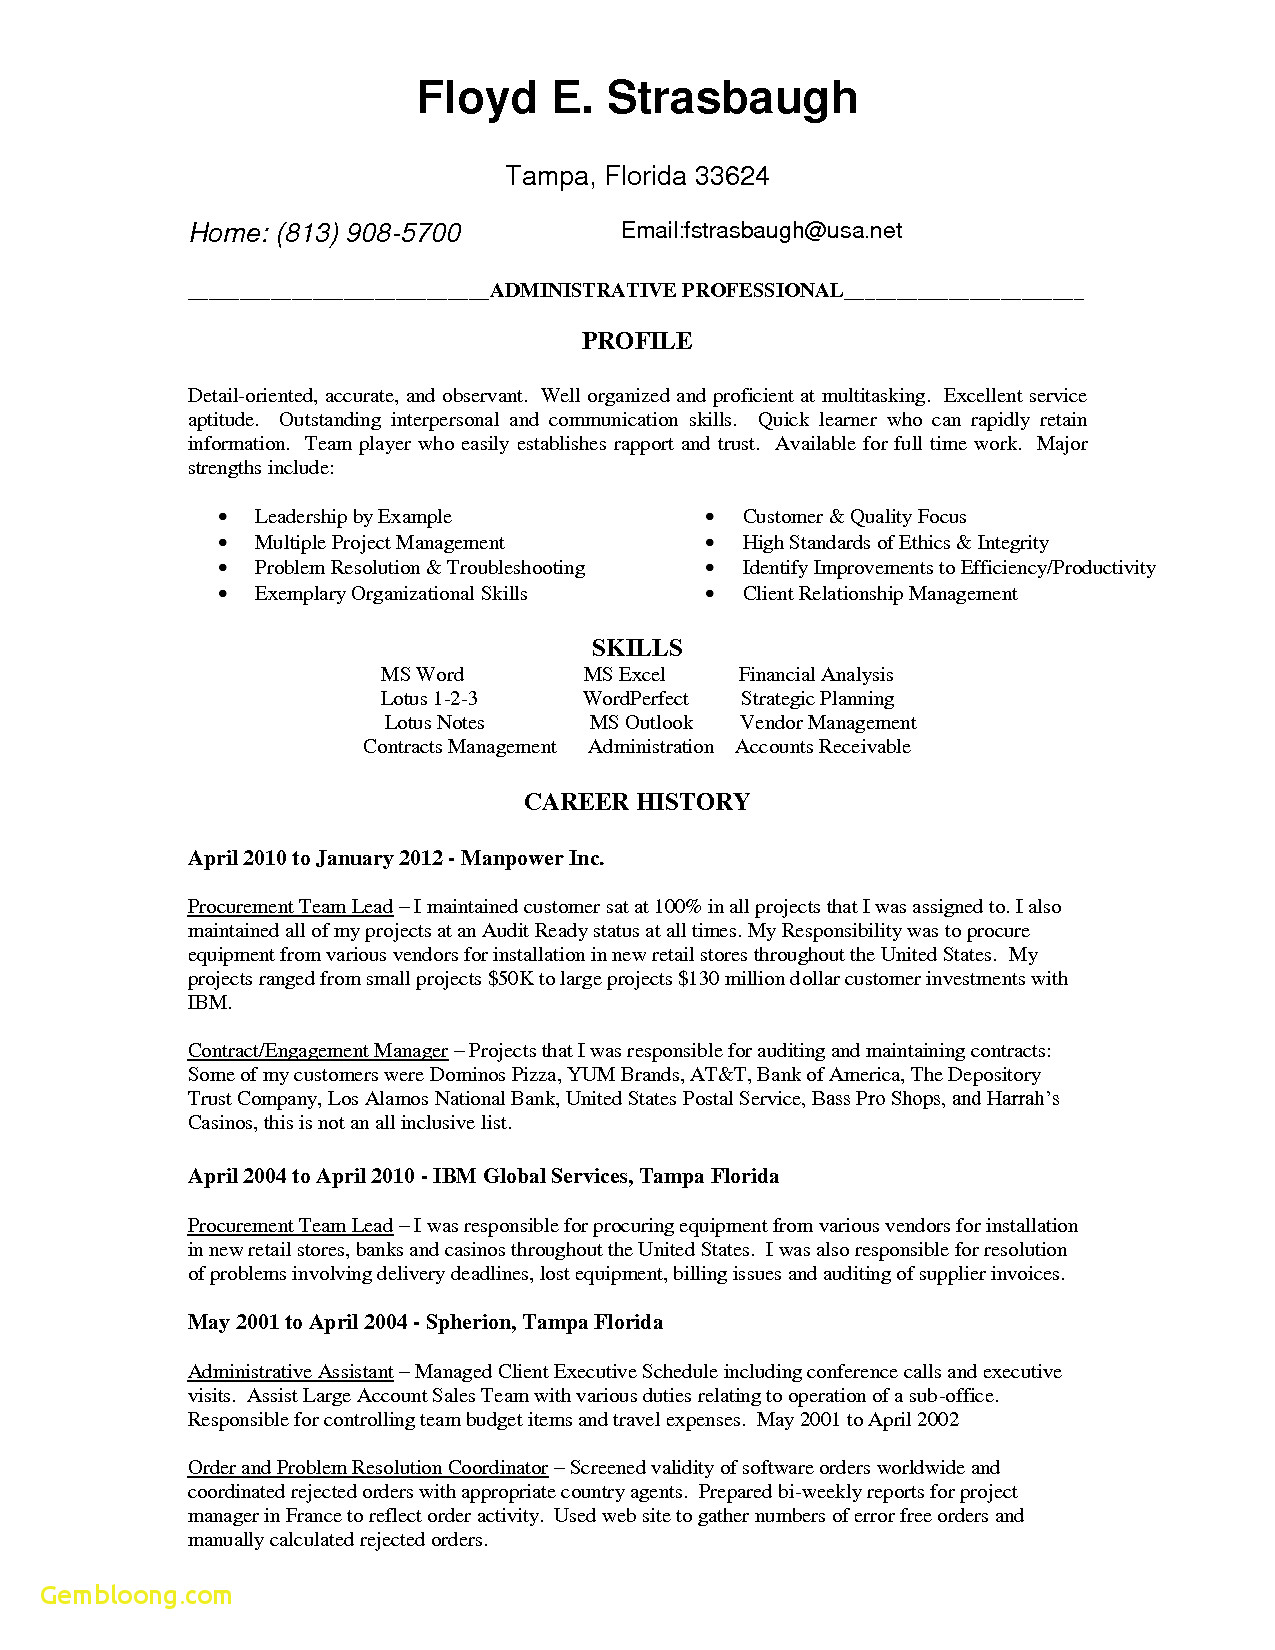 Cover Letter Template Word Doc - Resume Template Word Doc Download now Executive Resume Templates